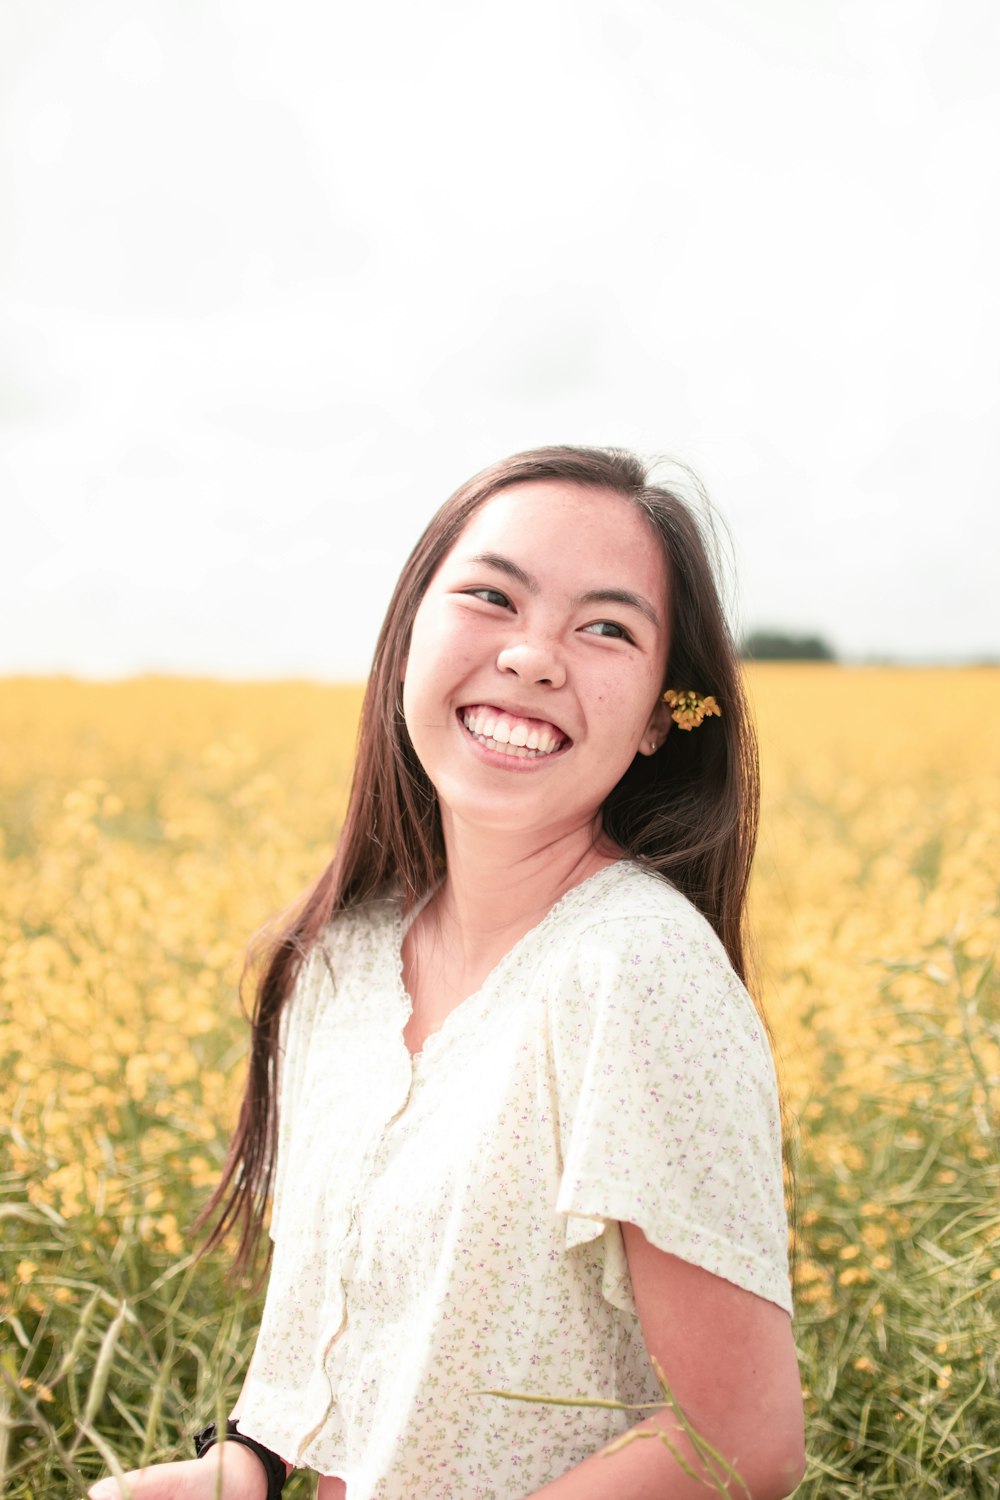 smiling woman in white long sleeve shirt standing on yellow flower field during daytime